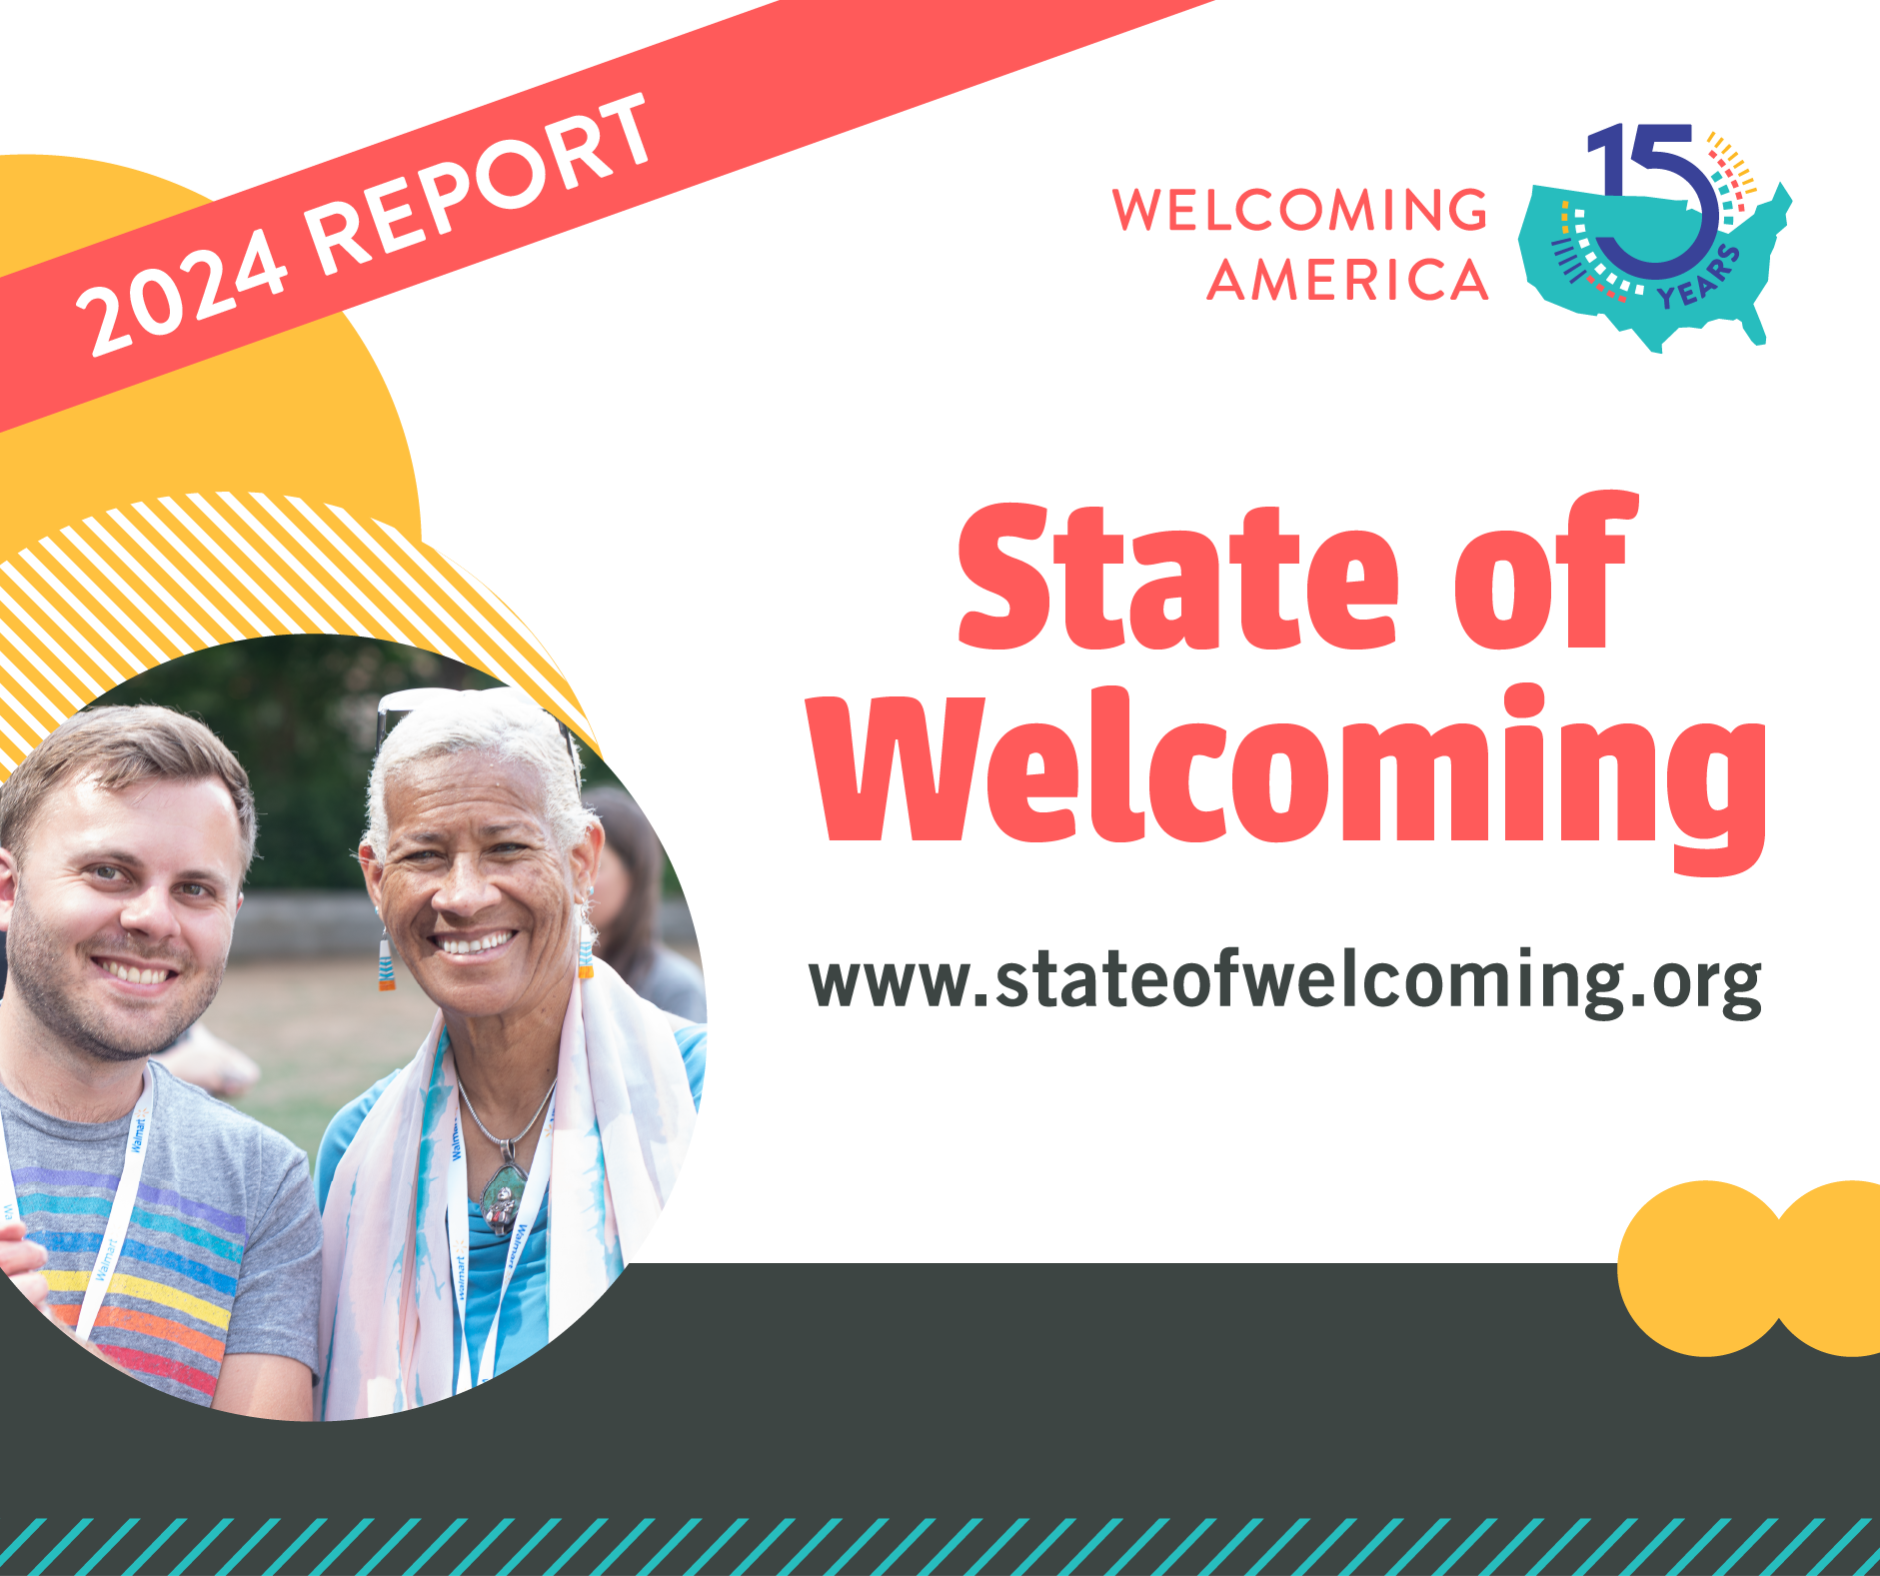 State of Welcoming 2024 Report. www.stateofwelcoming.org